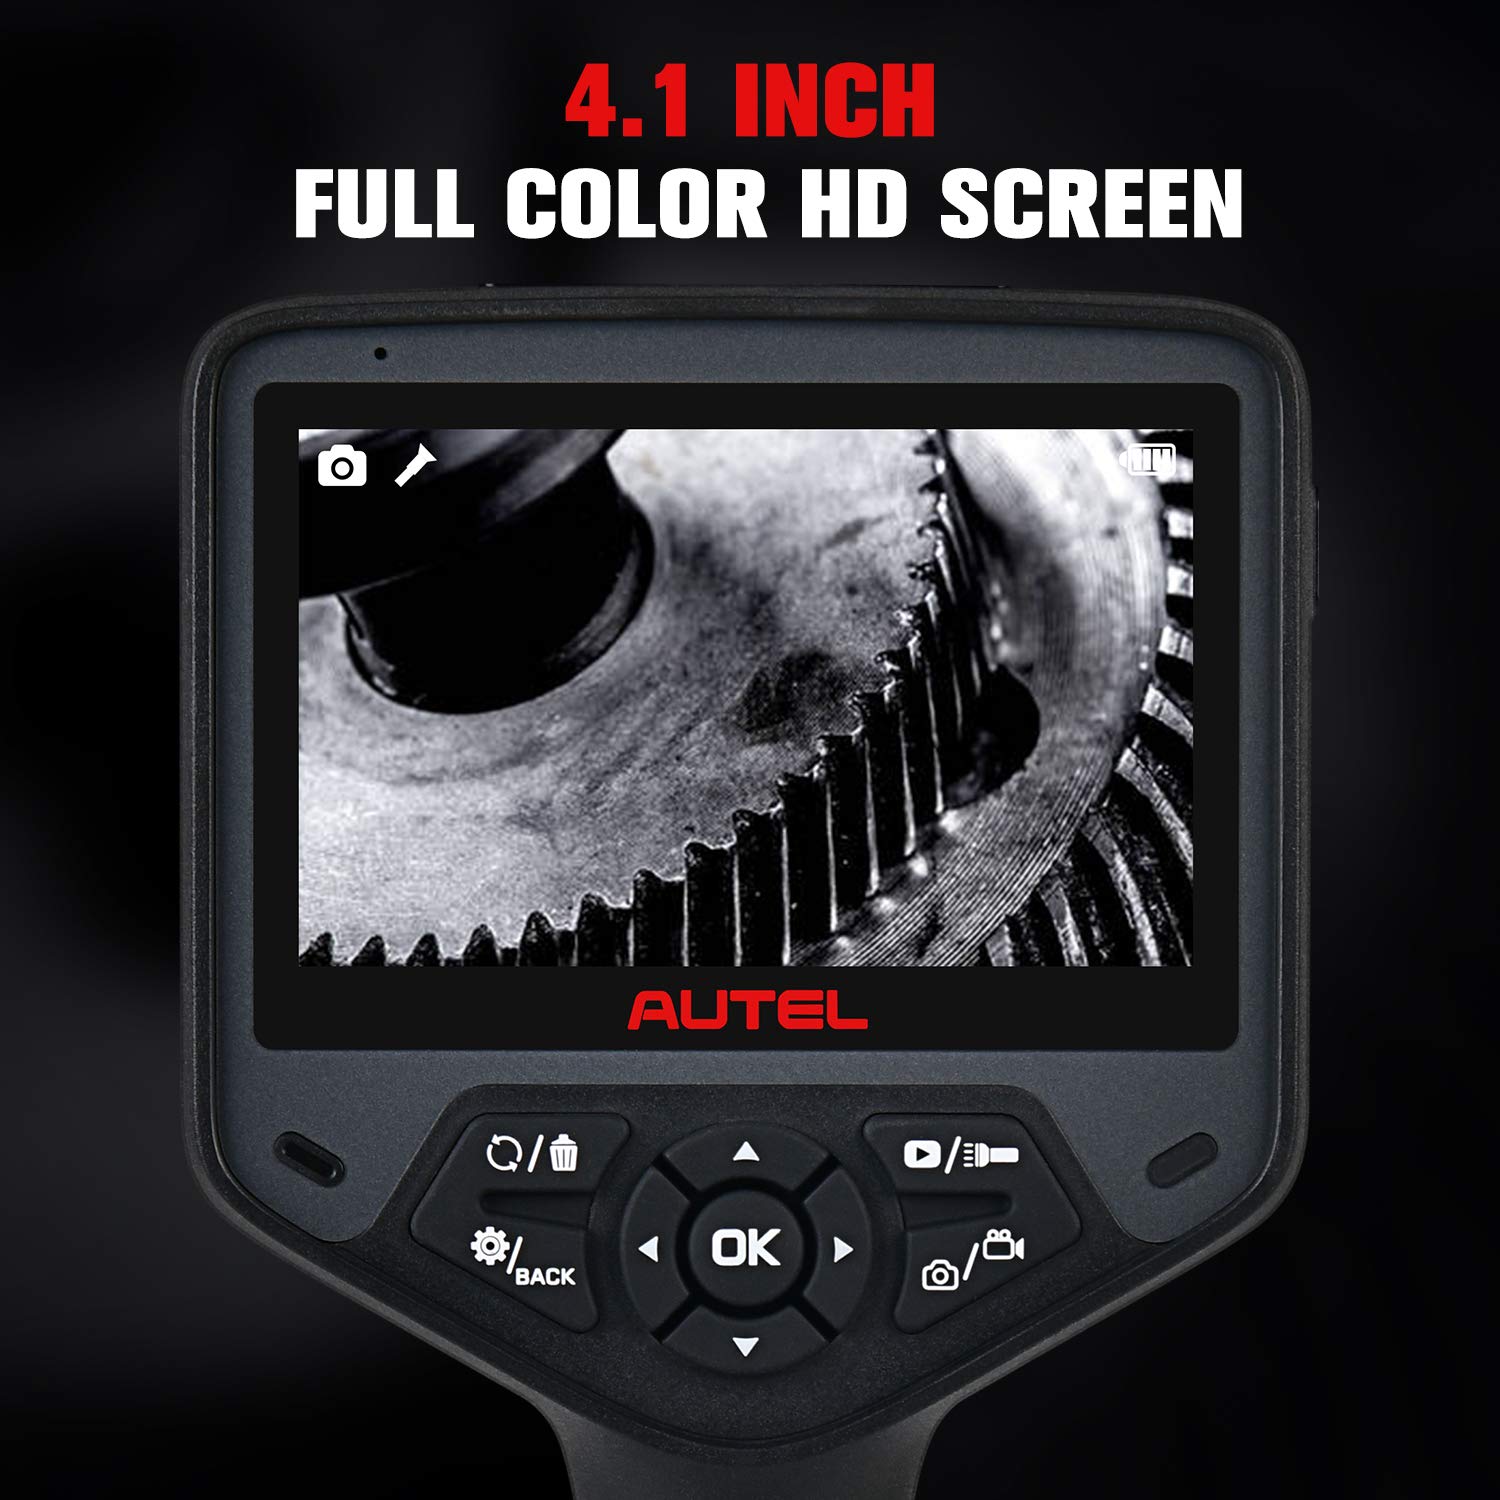 4.1-inch full color LCD display (1200 x 720)